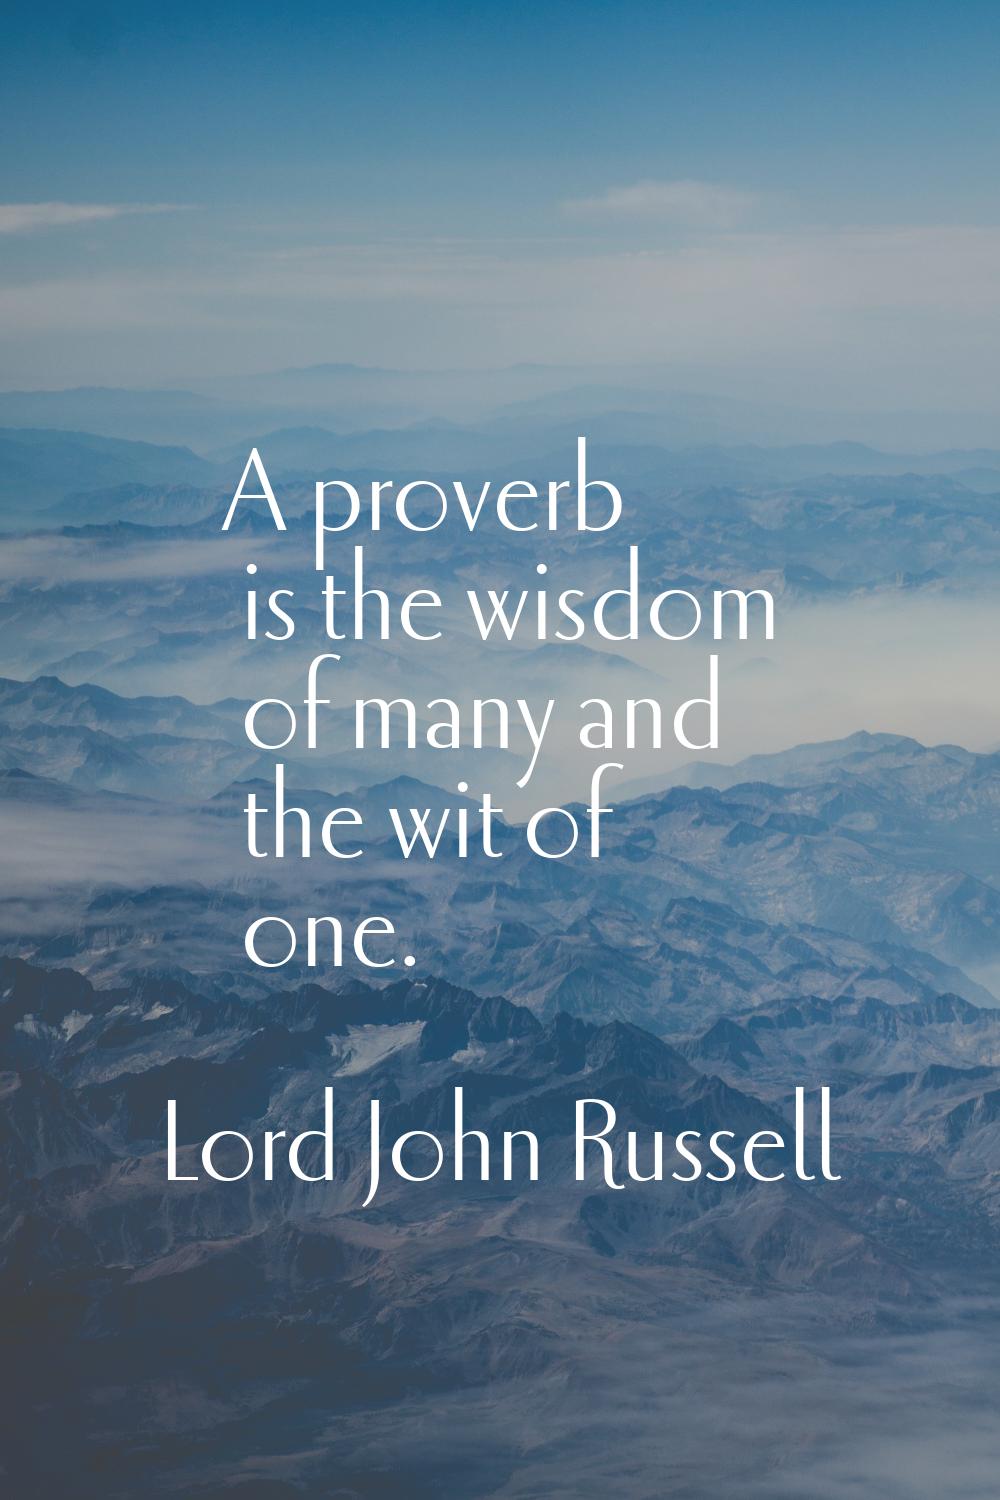 A proverb is the wisdom of many and the wit of one.